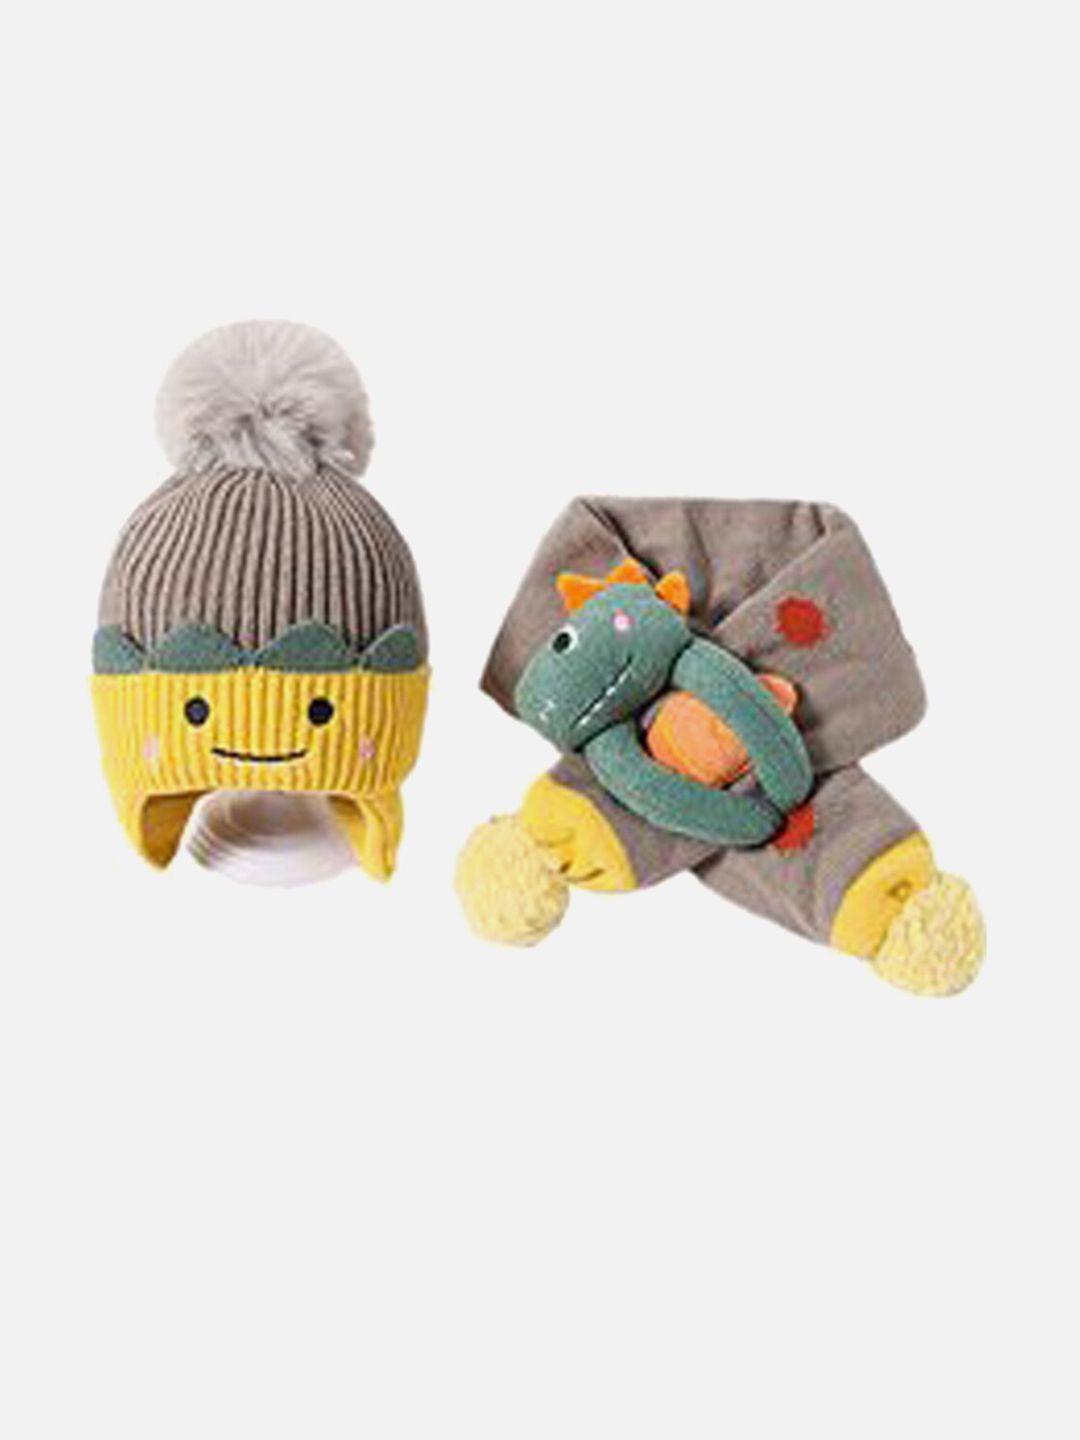 little surprise box llp kids knitted winter patterned wool mufflers with cap